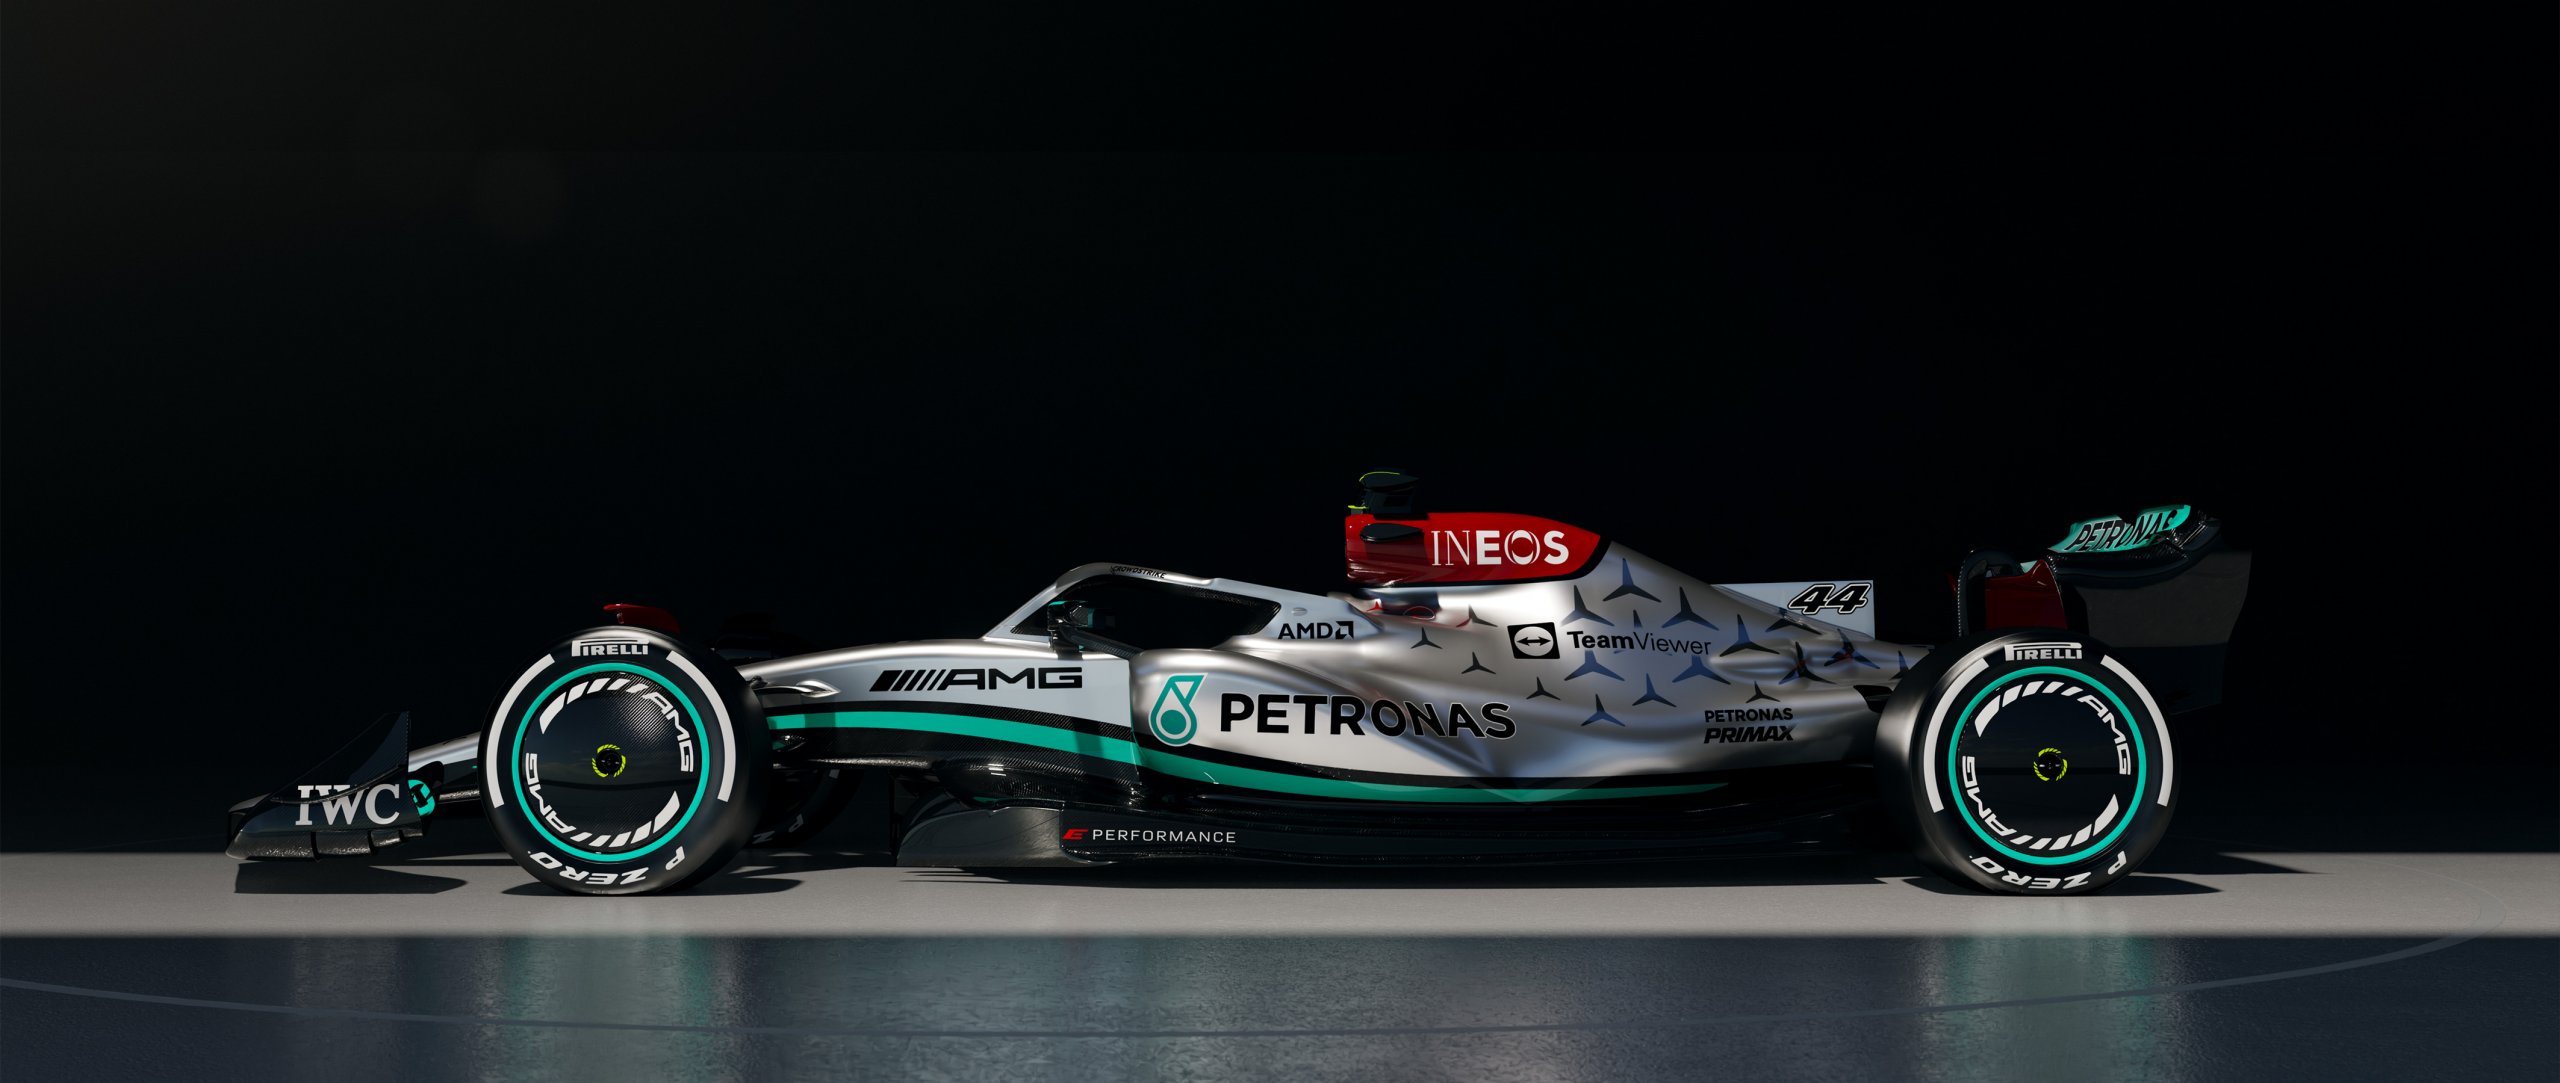 Introducing W13, the Mercedes-AMG Petronas F1 Teams challenger for 2022